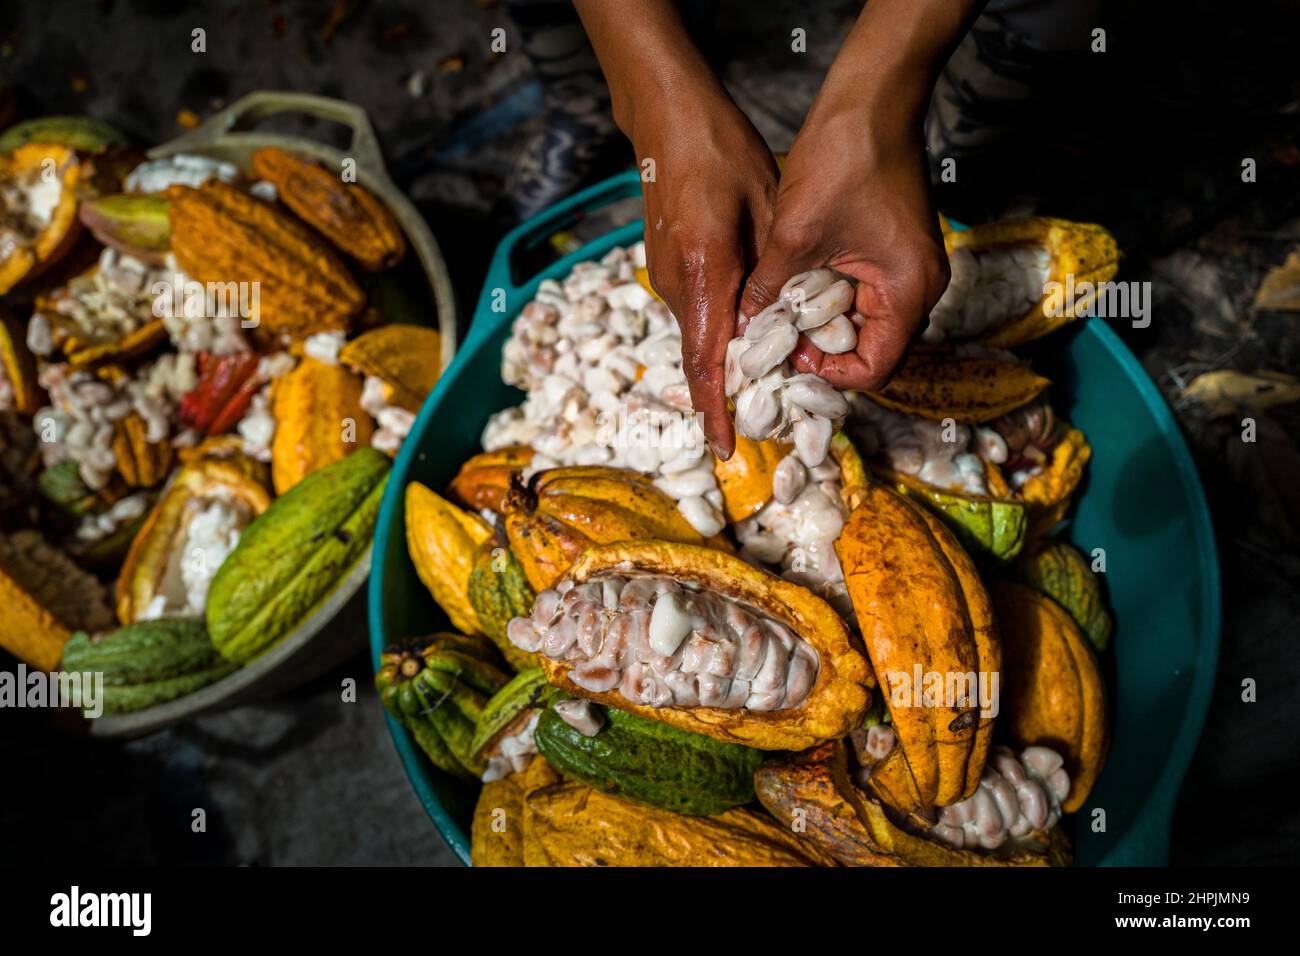 An Afro-Colombian farmer separates pulpy cacao seeds from a cacao pod during a harvest on a traditional cacao farm in Cuernavaca, Cauca, Colombia. Stock Photo